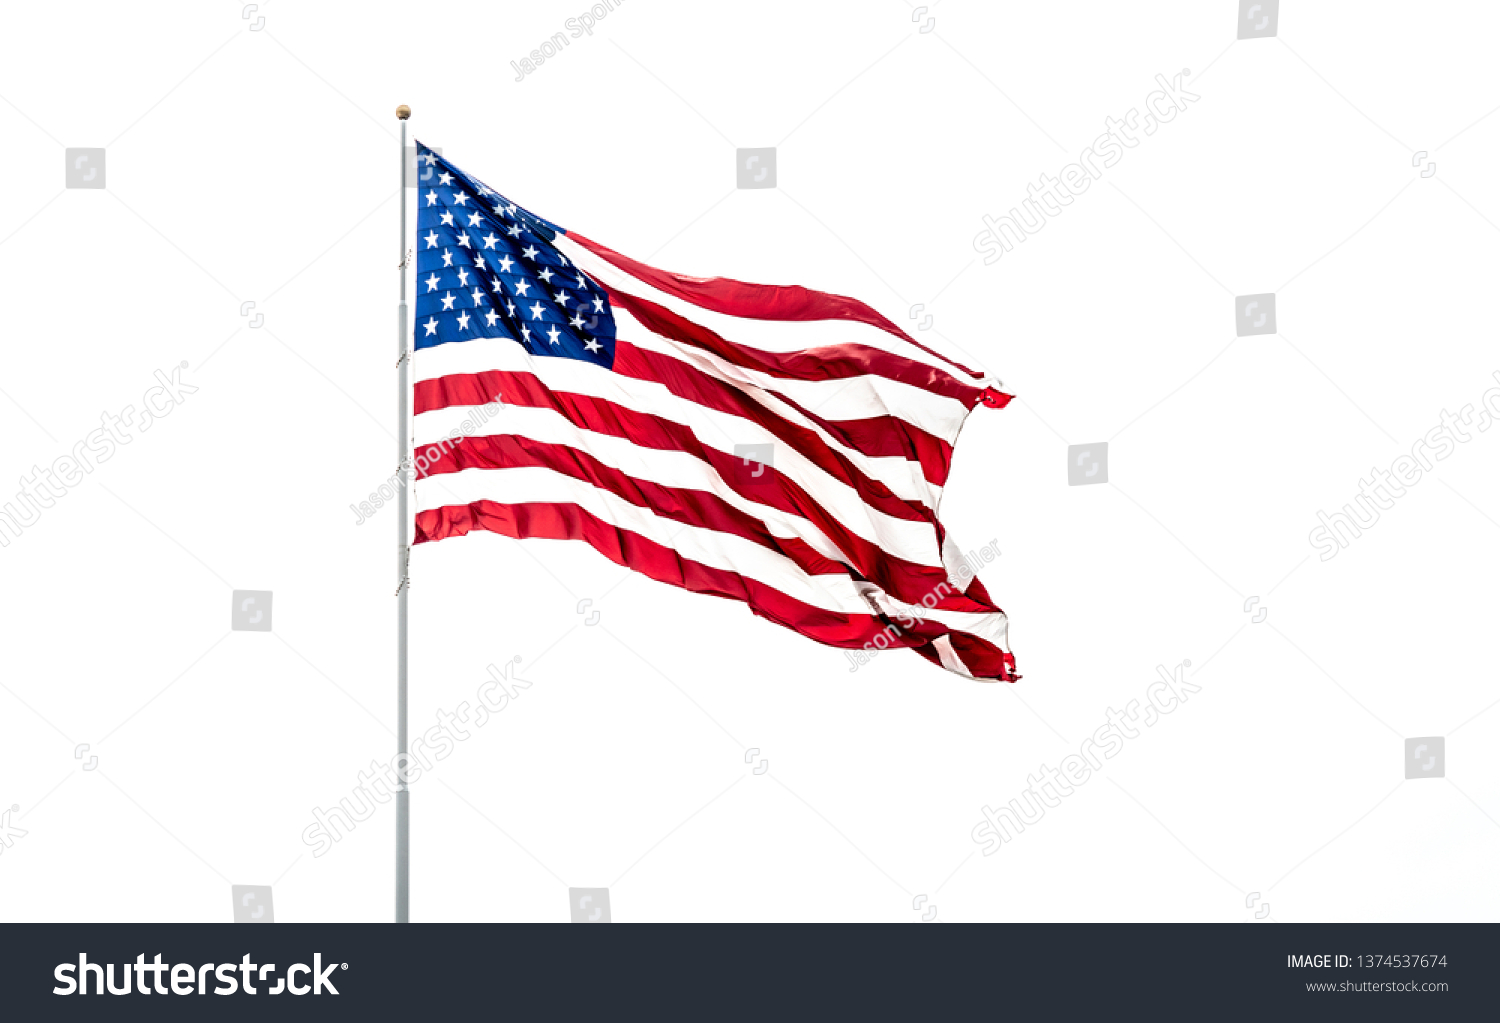 Isolated USA Flag with stars and stripes waving in wind on flag pole against white background. #1374537674